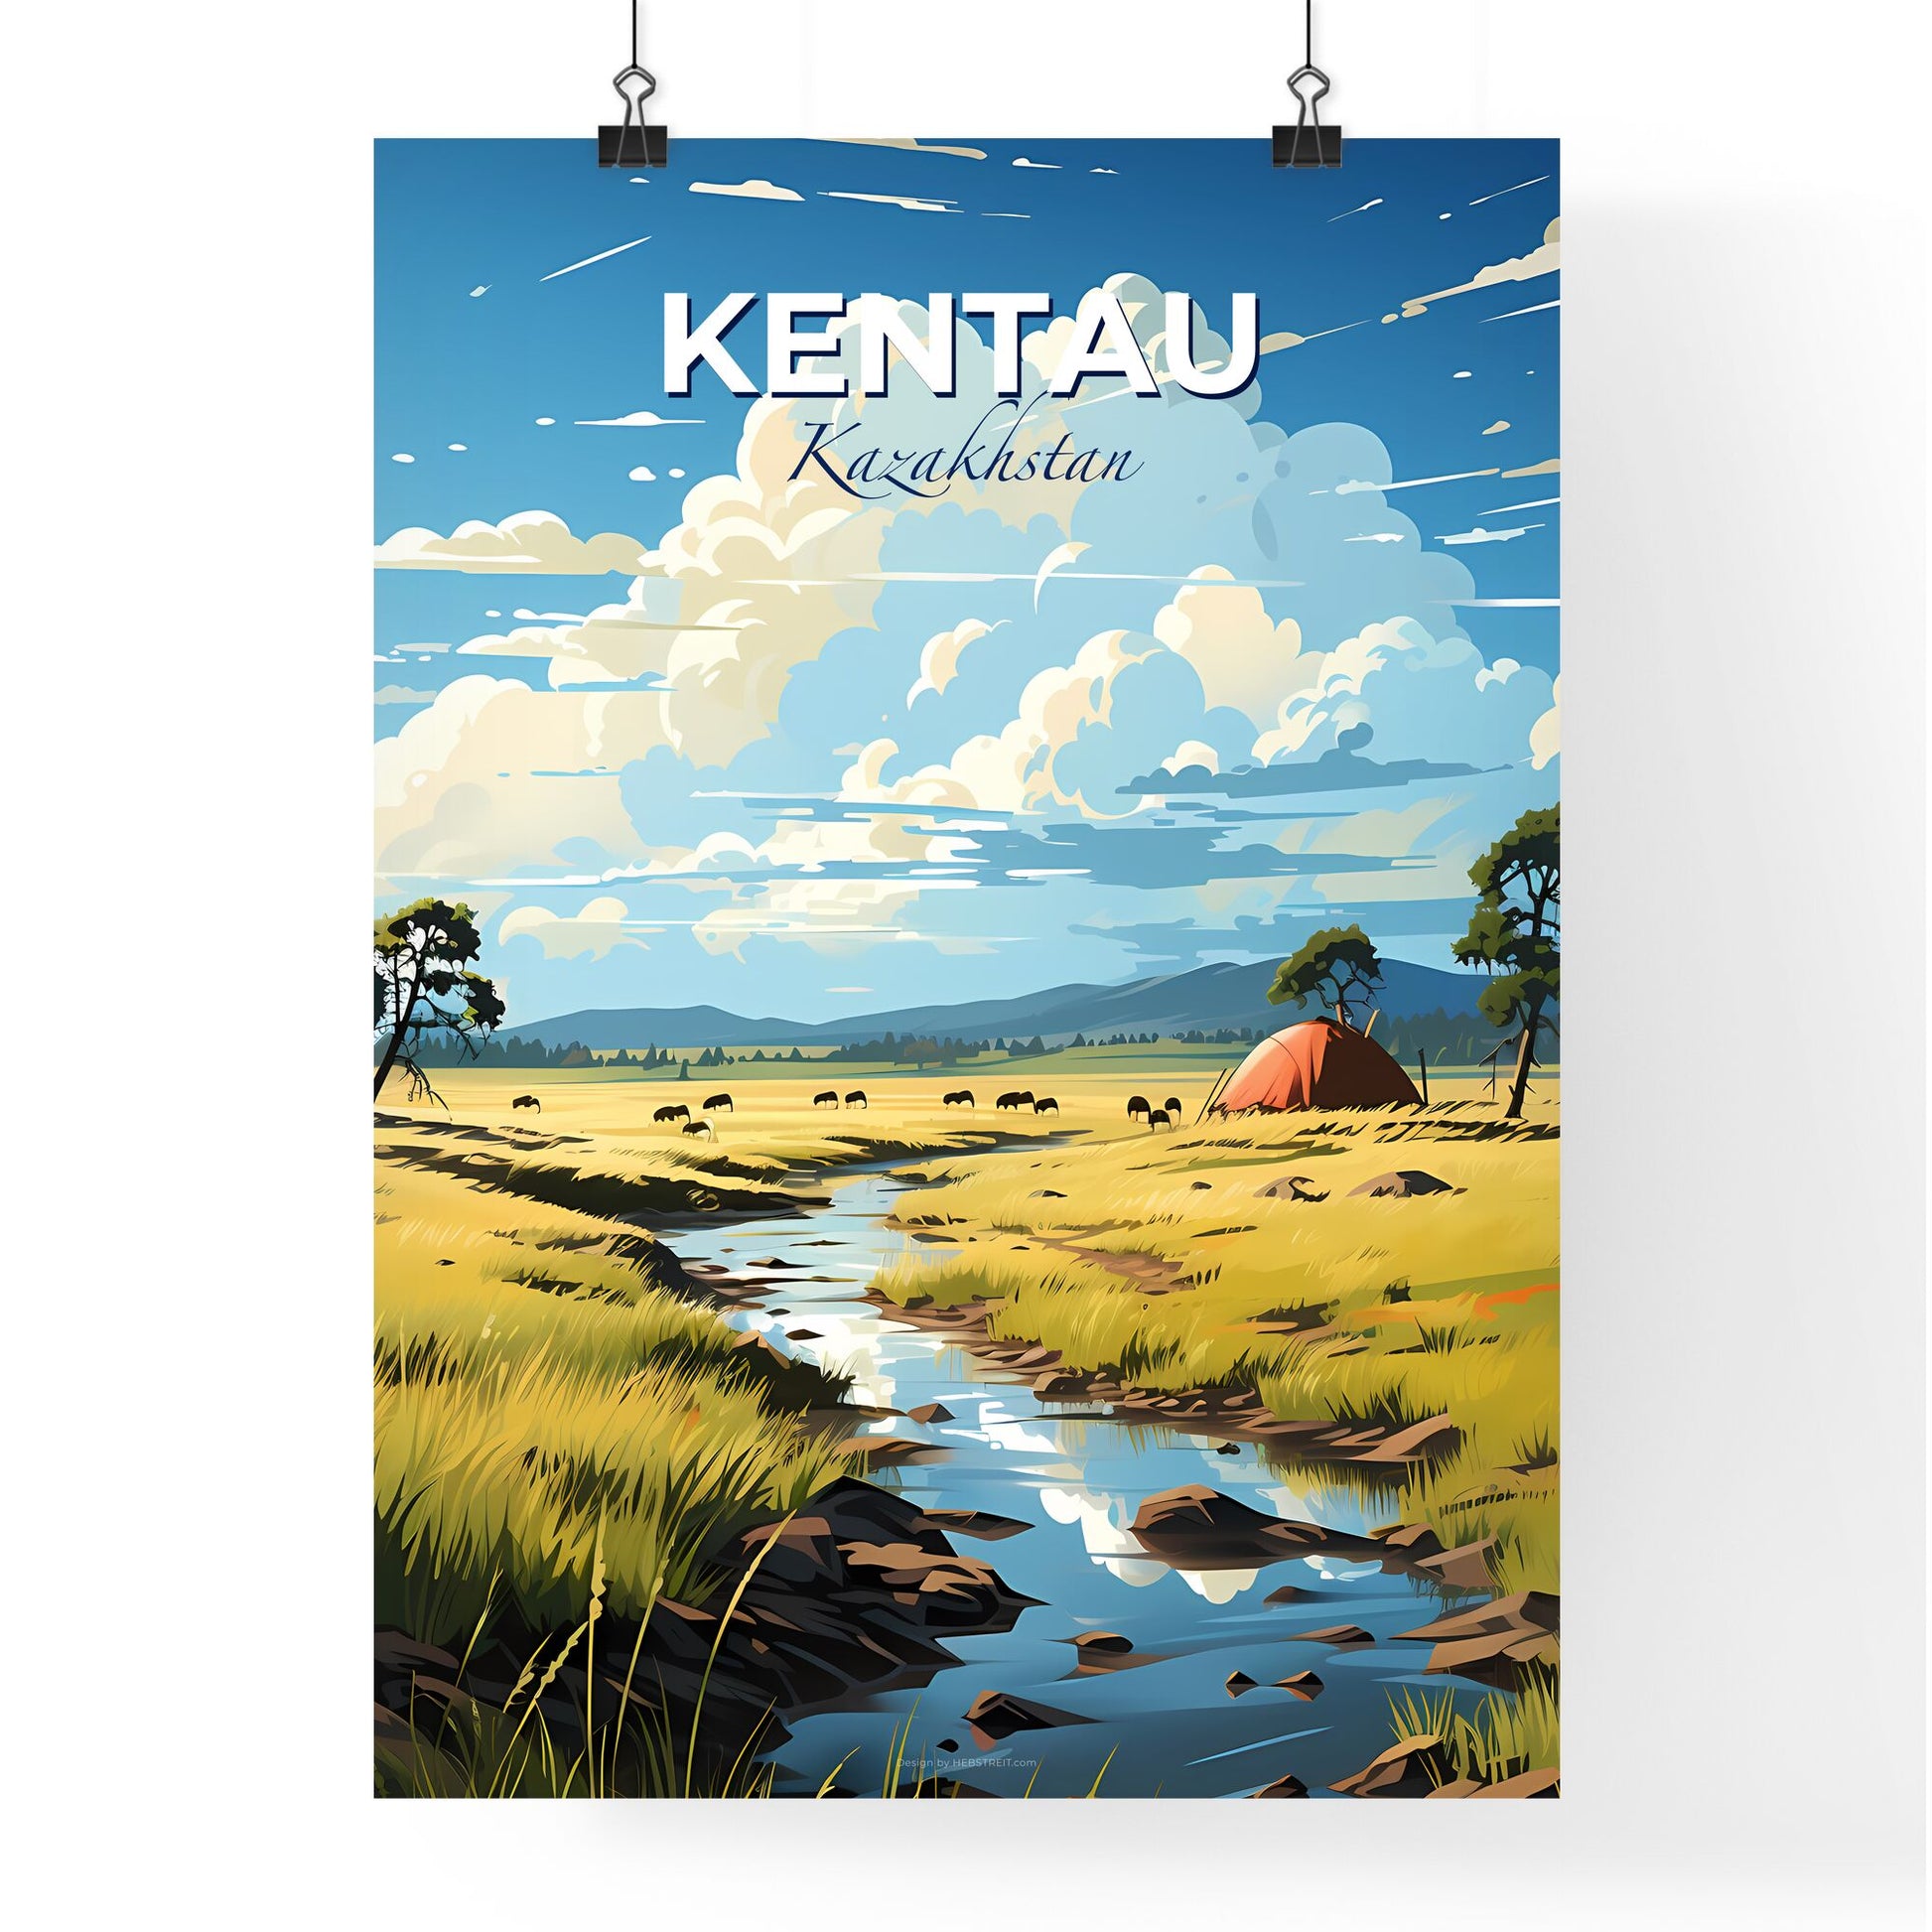 Kentau, Kazakhstan, A Poster of a stream running through a grassy field with a tent and trees Default Title